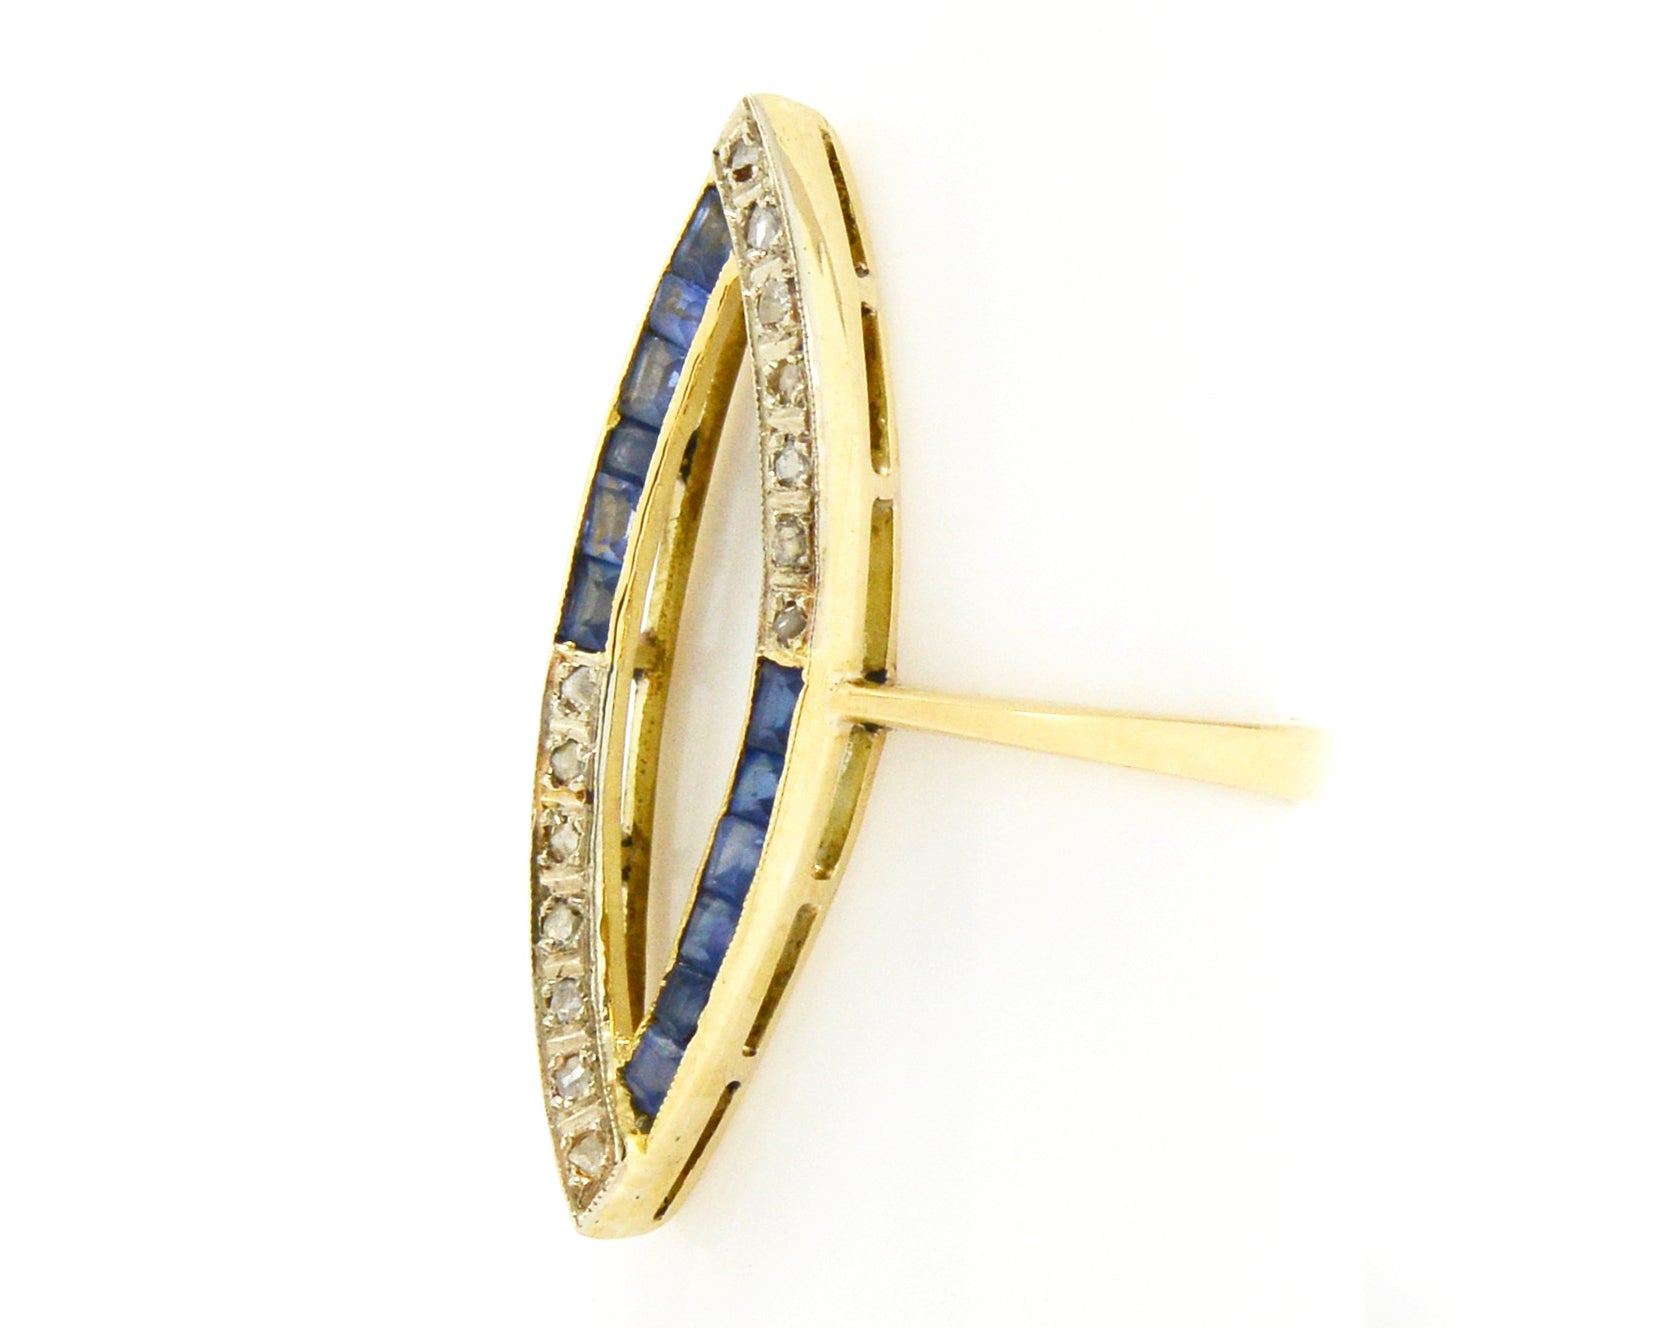 A size 7 and a half, gold antique Art Deco cocktail ring.